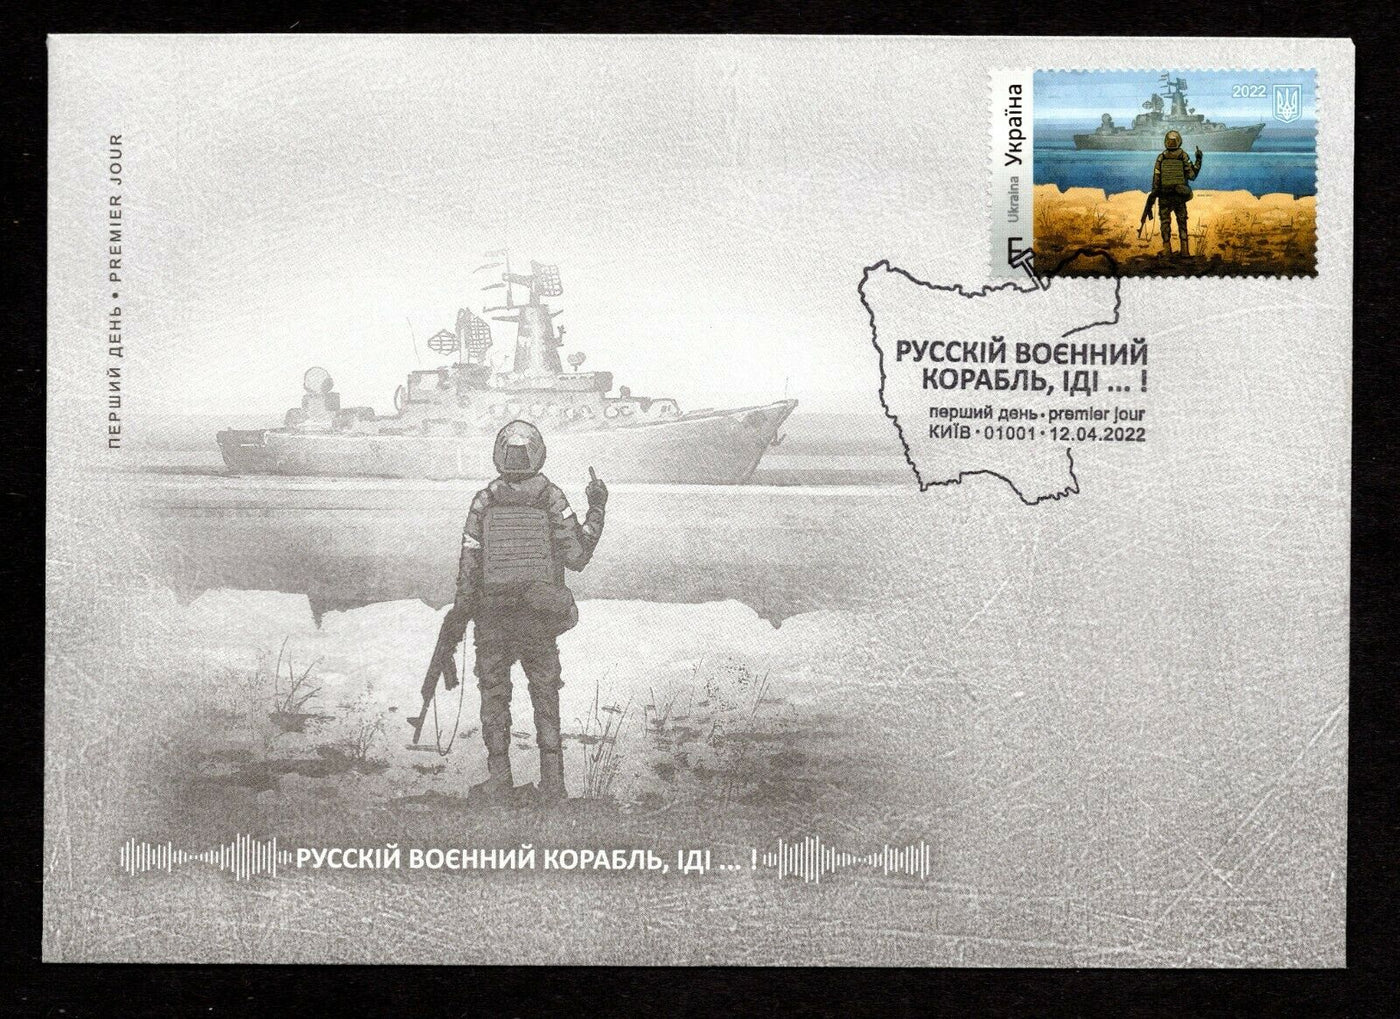 "Russian warship, go ...!", First Day Cover, Circulation 20000, Stamp F, Kiev